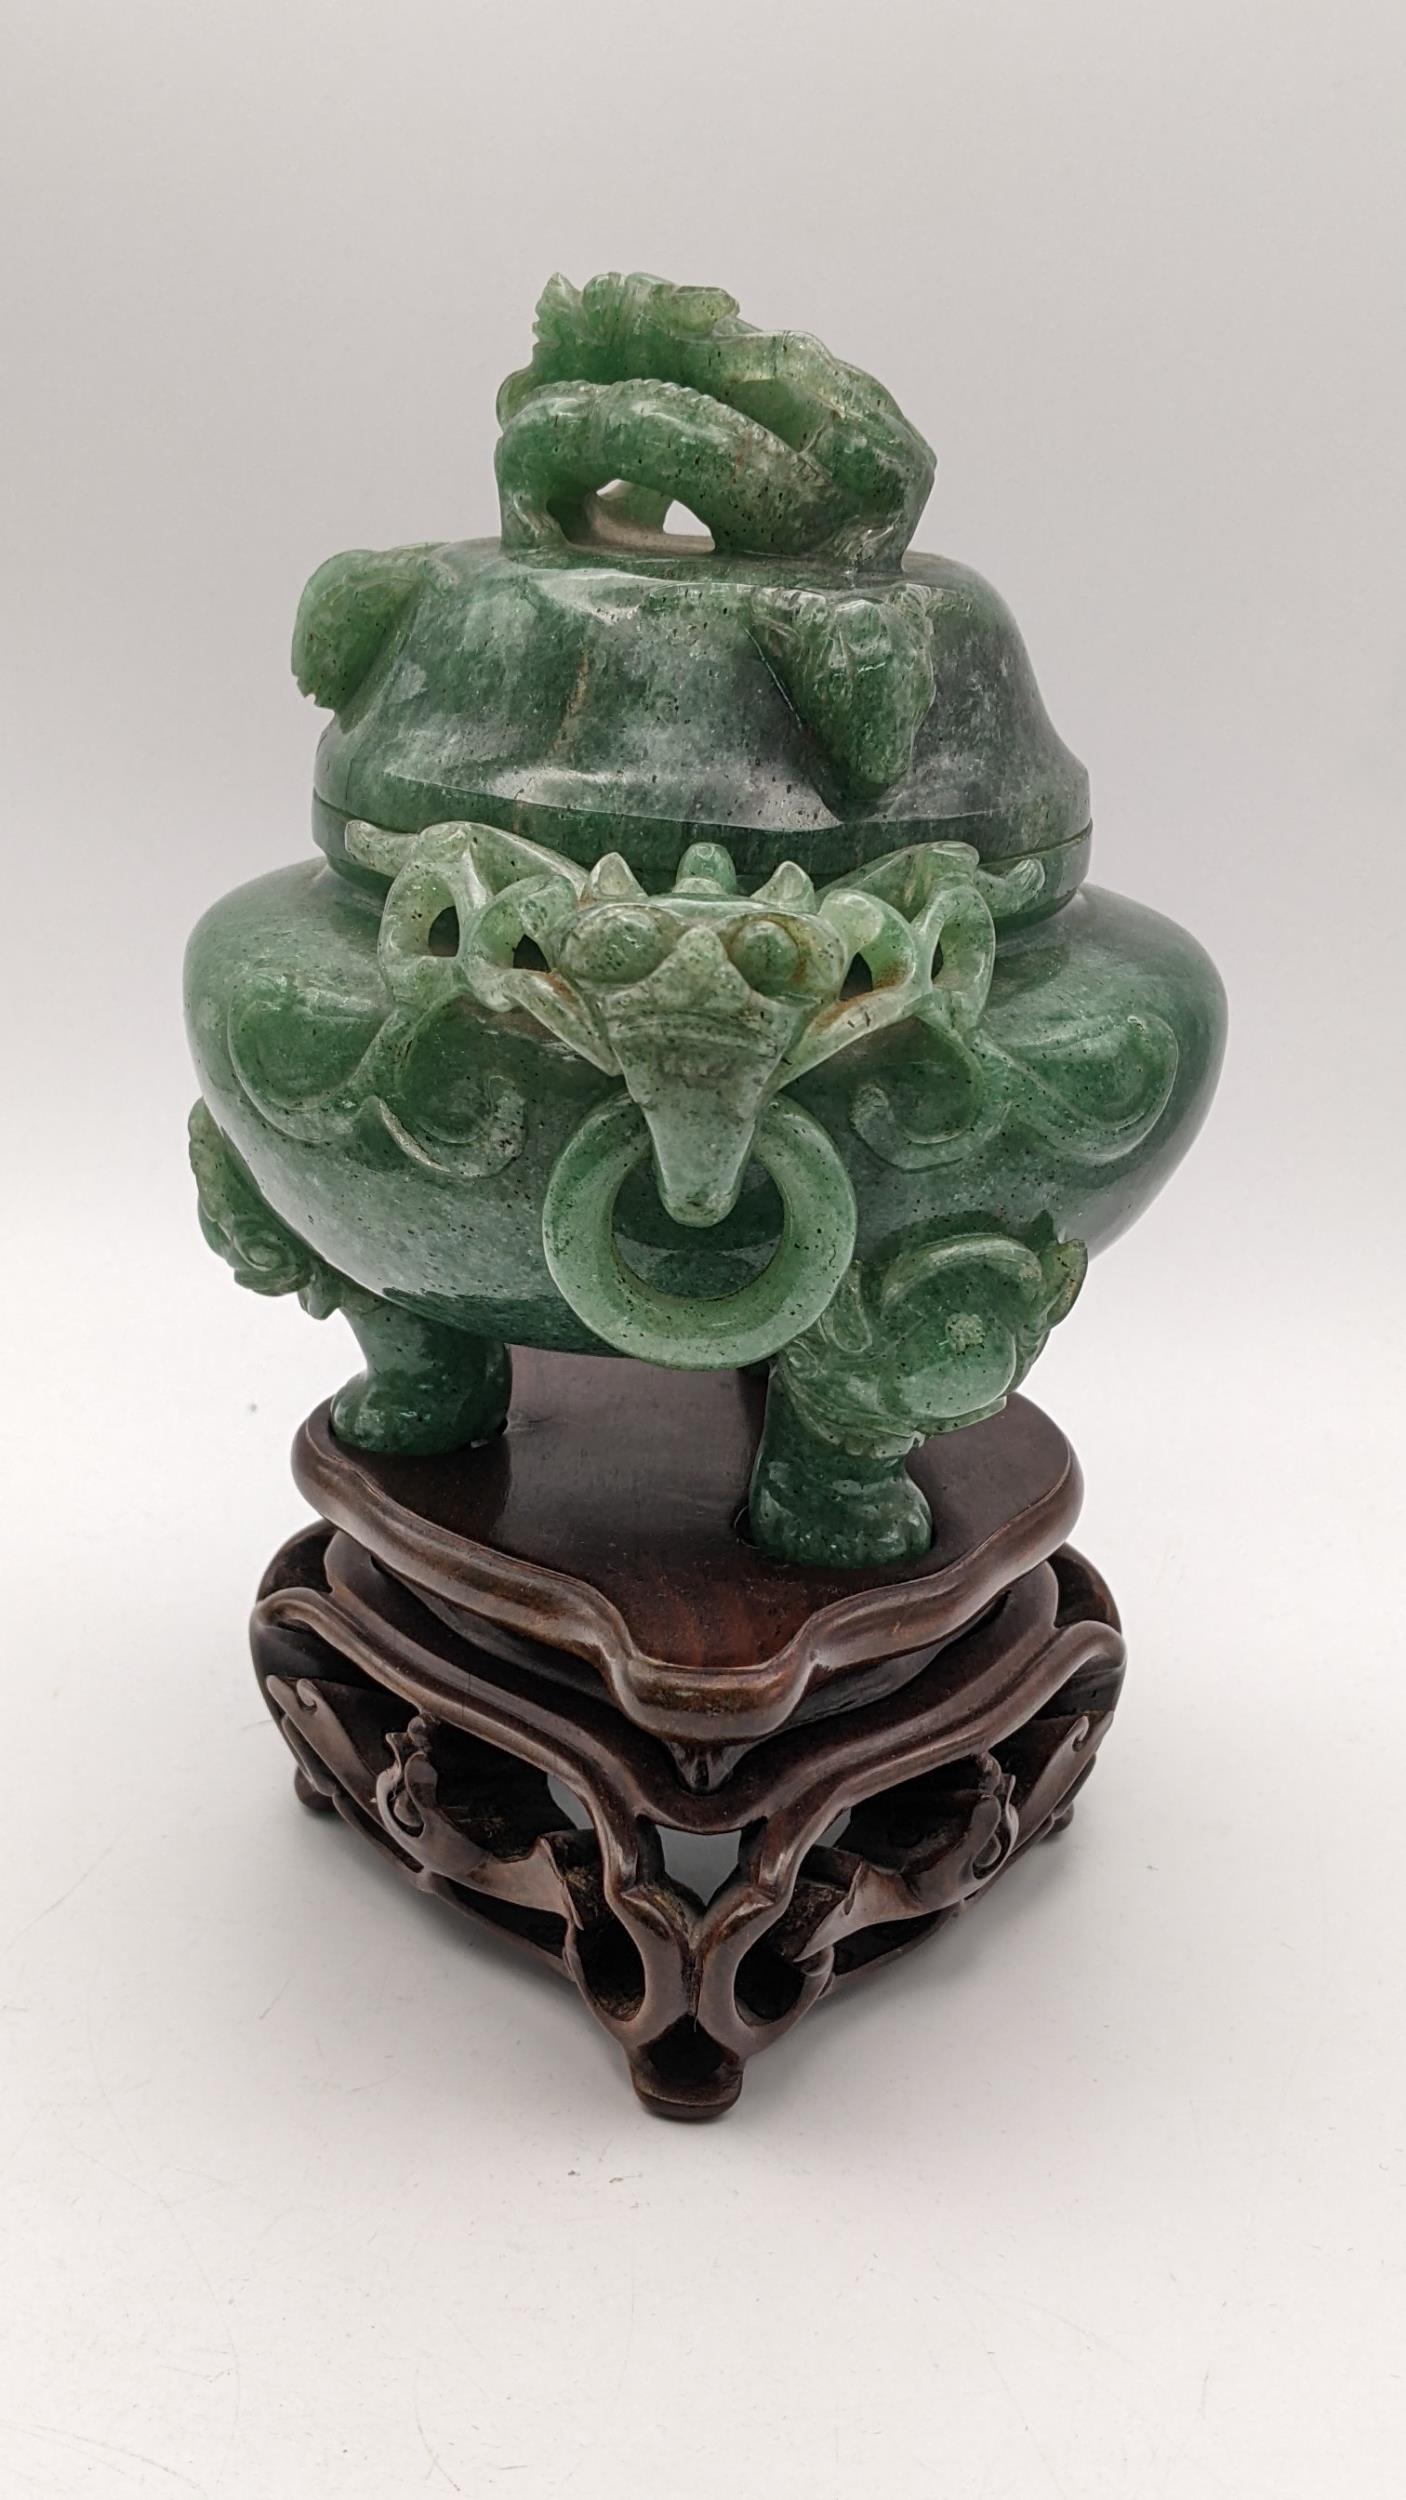 A 20th century Chinese jade censor, the lid decorated with a coiled dragon - Image 2 of 5